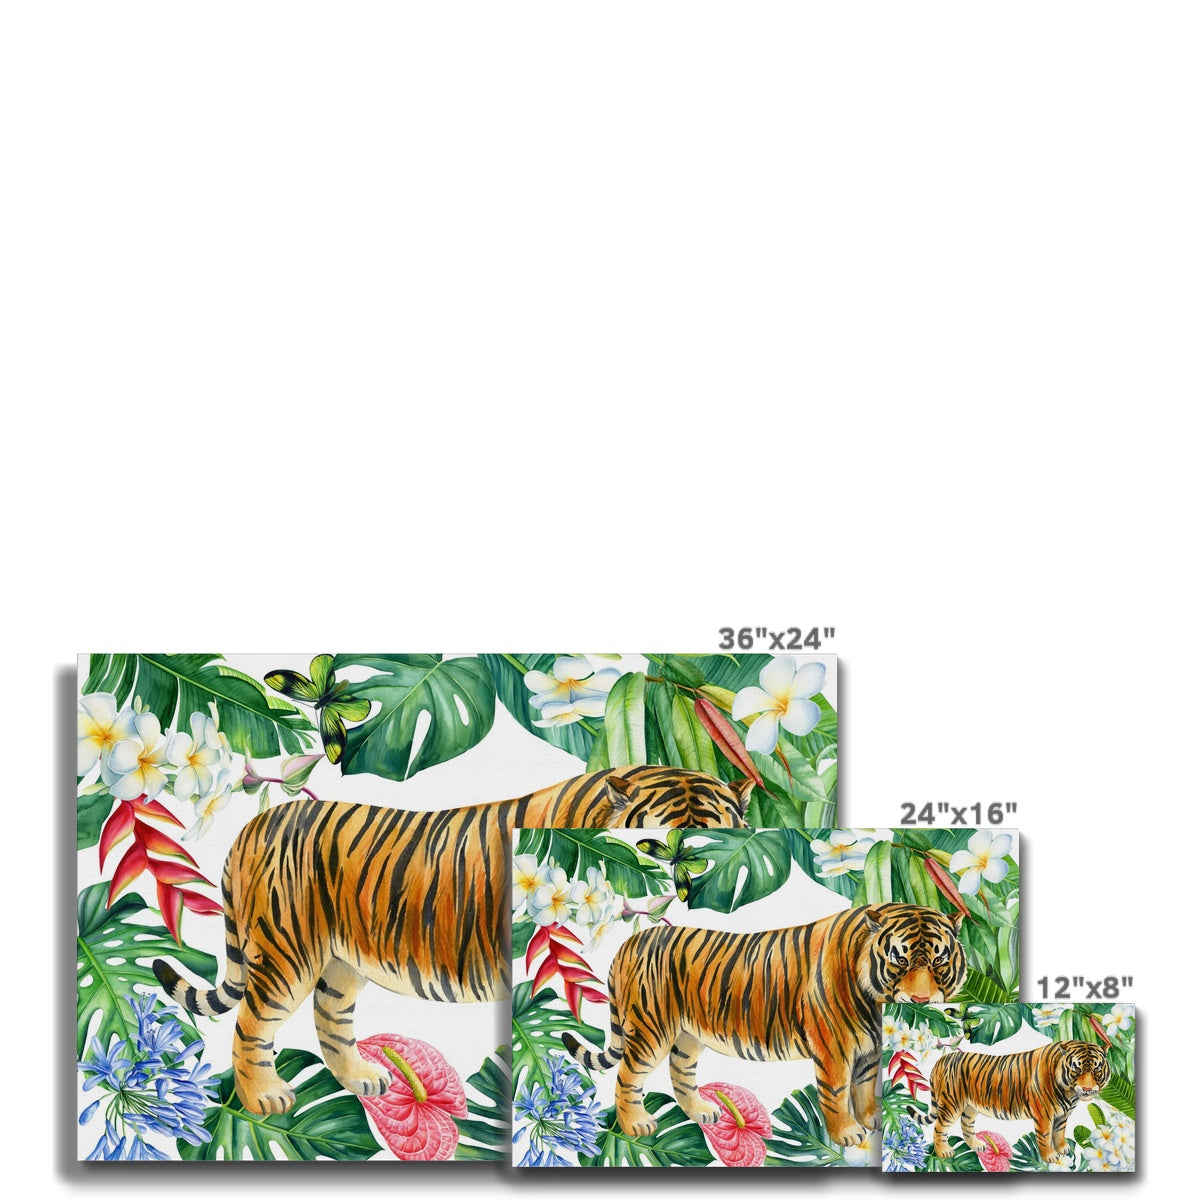 Tiger In A Seamless Forest Art Canvas